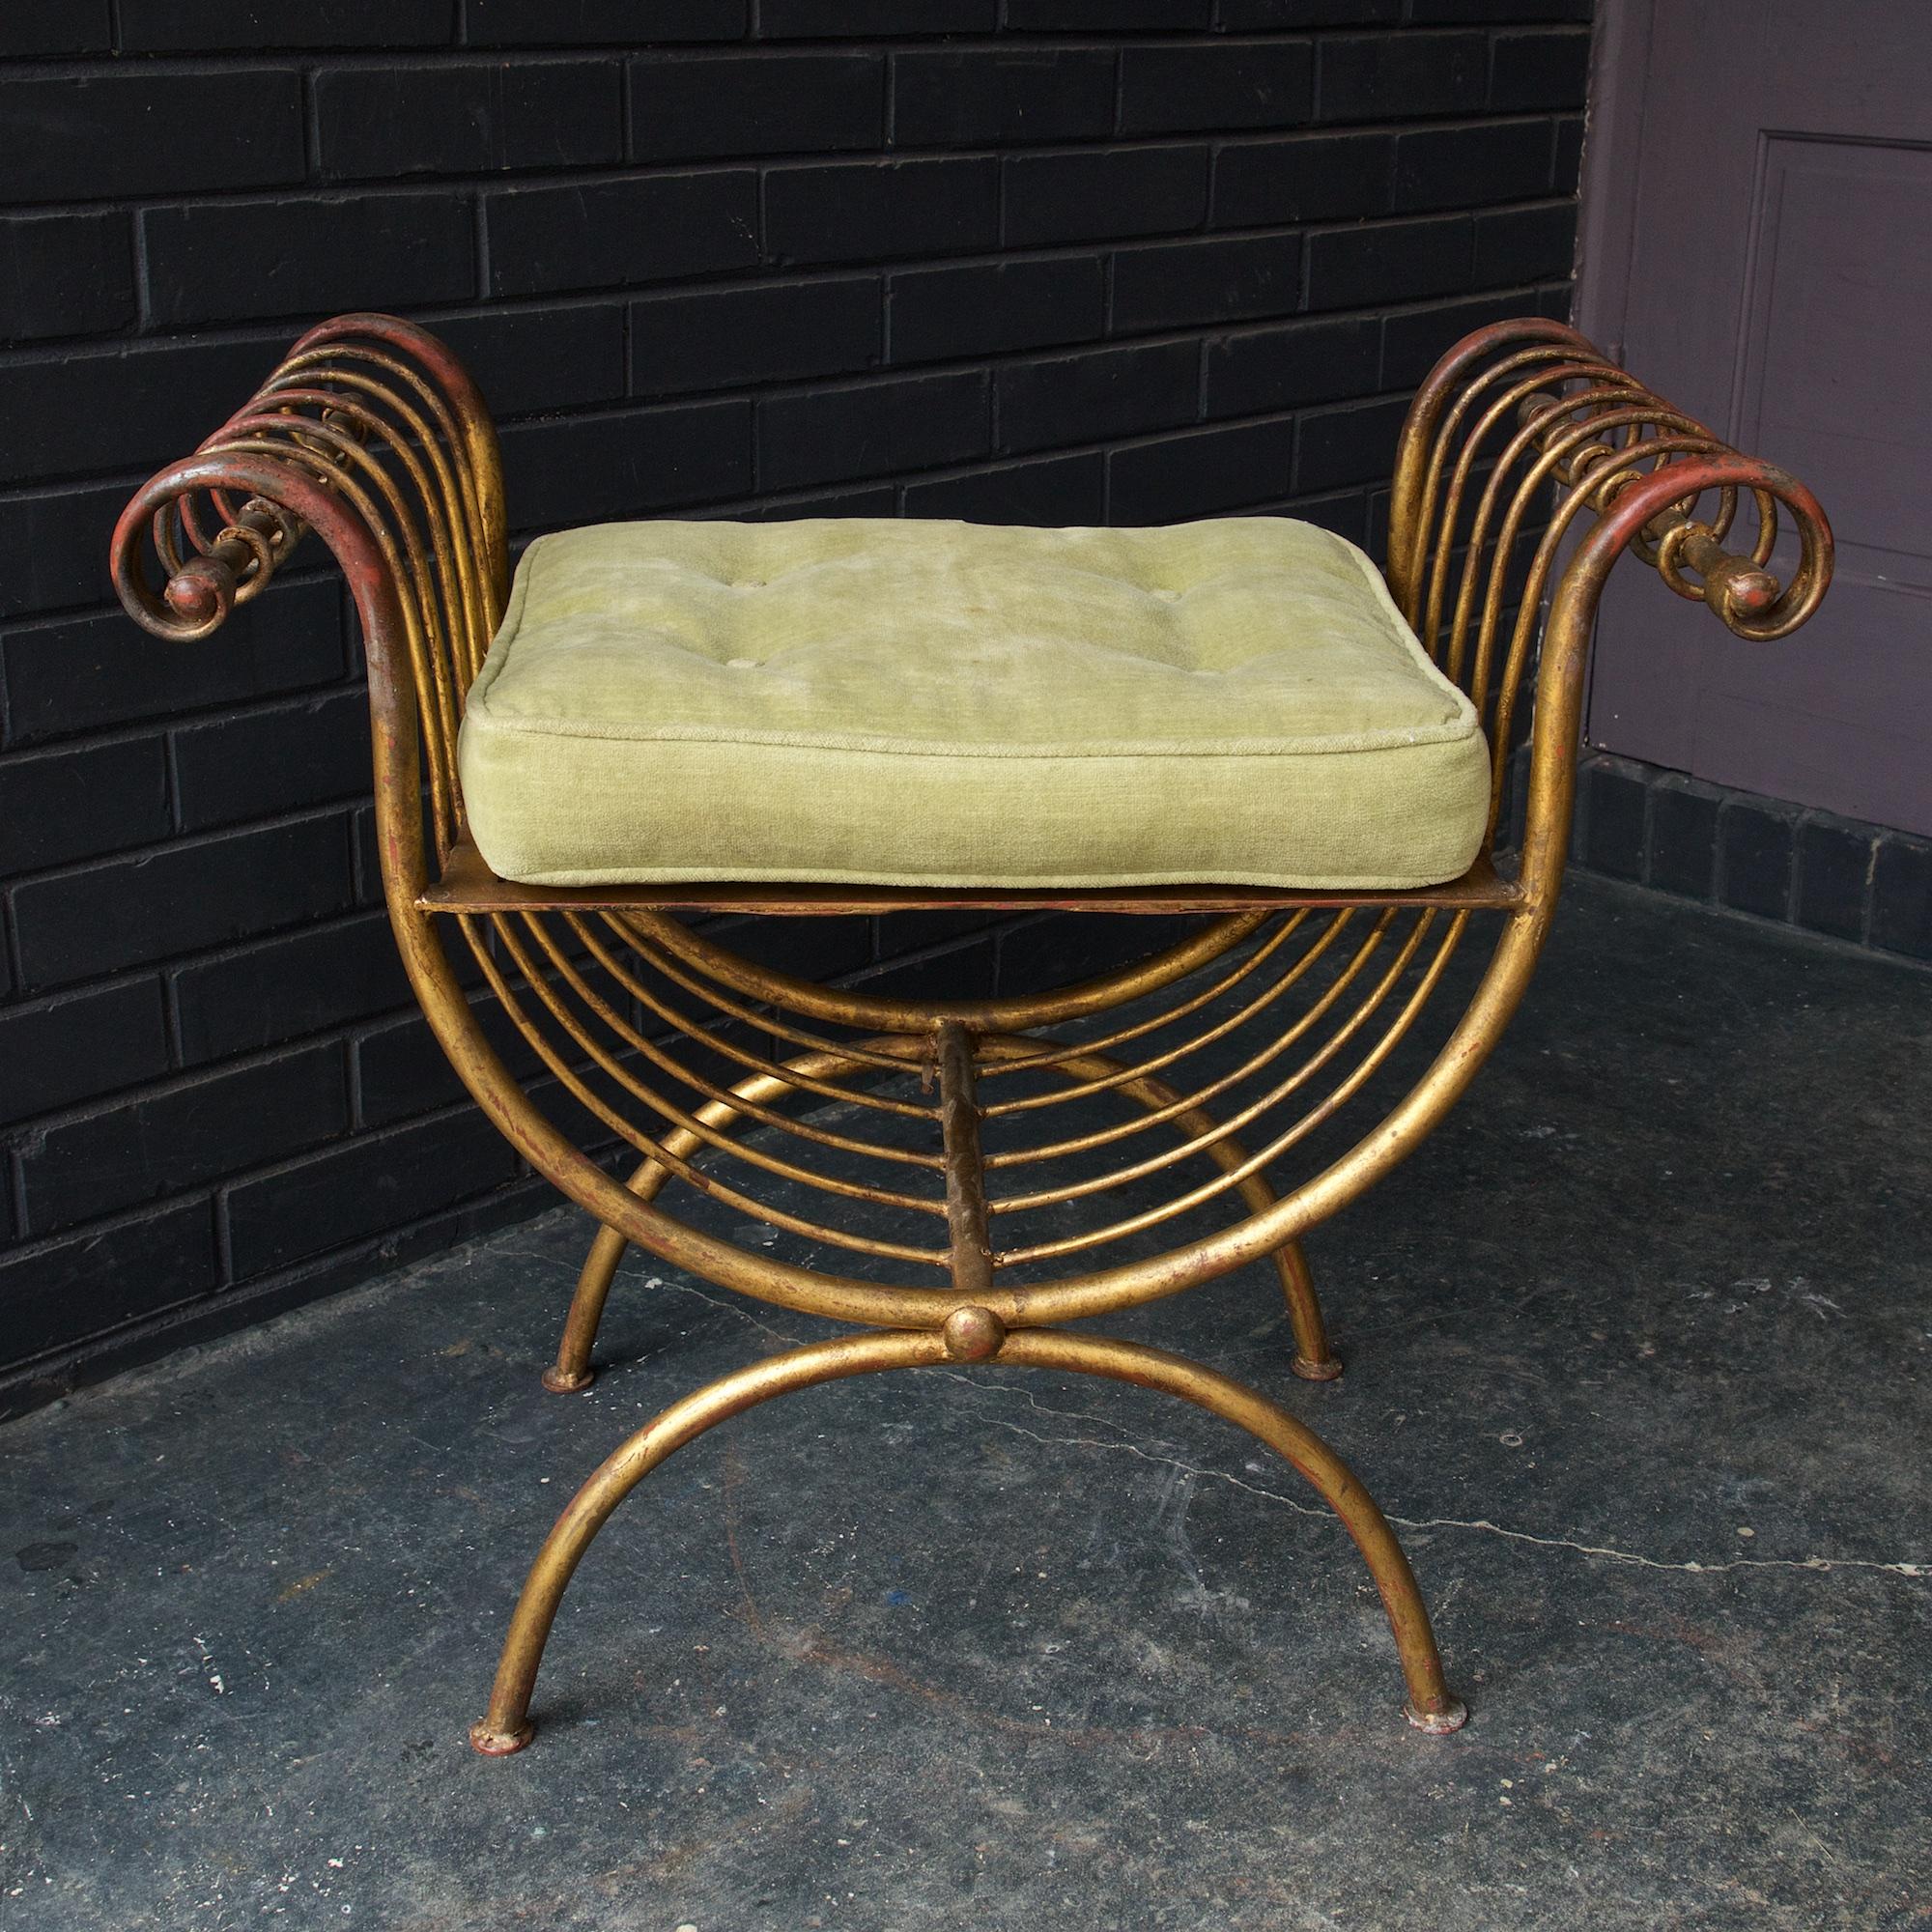 S. Salvadori 1950s Italian stool or small bench is composed of a enameled gilt metal frame and original velvet cushion. Inspired by a Greek lyre harp form. Retains a metal hang tag marked Italy.